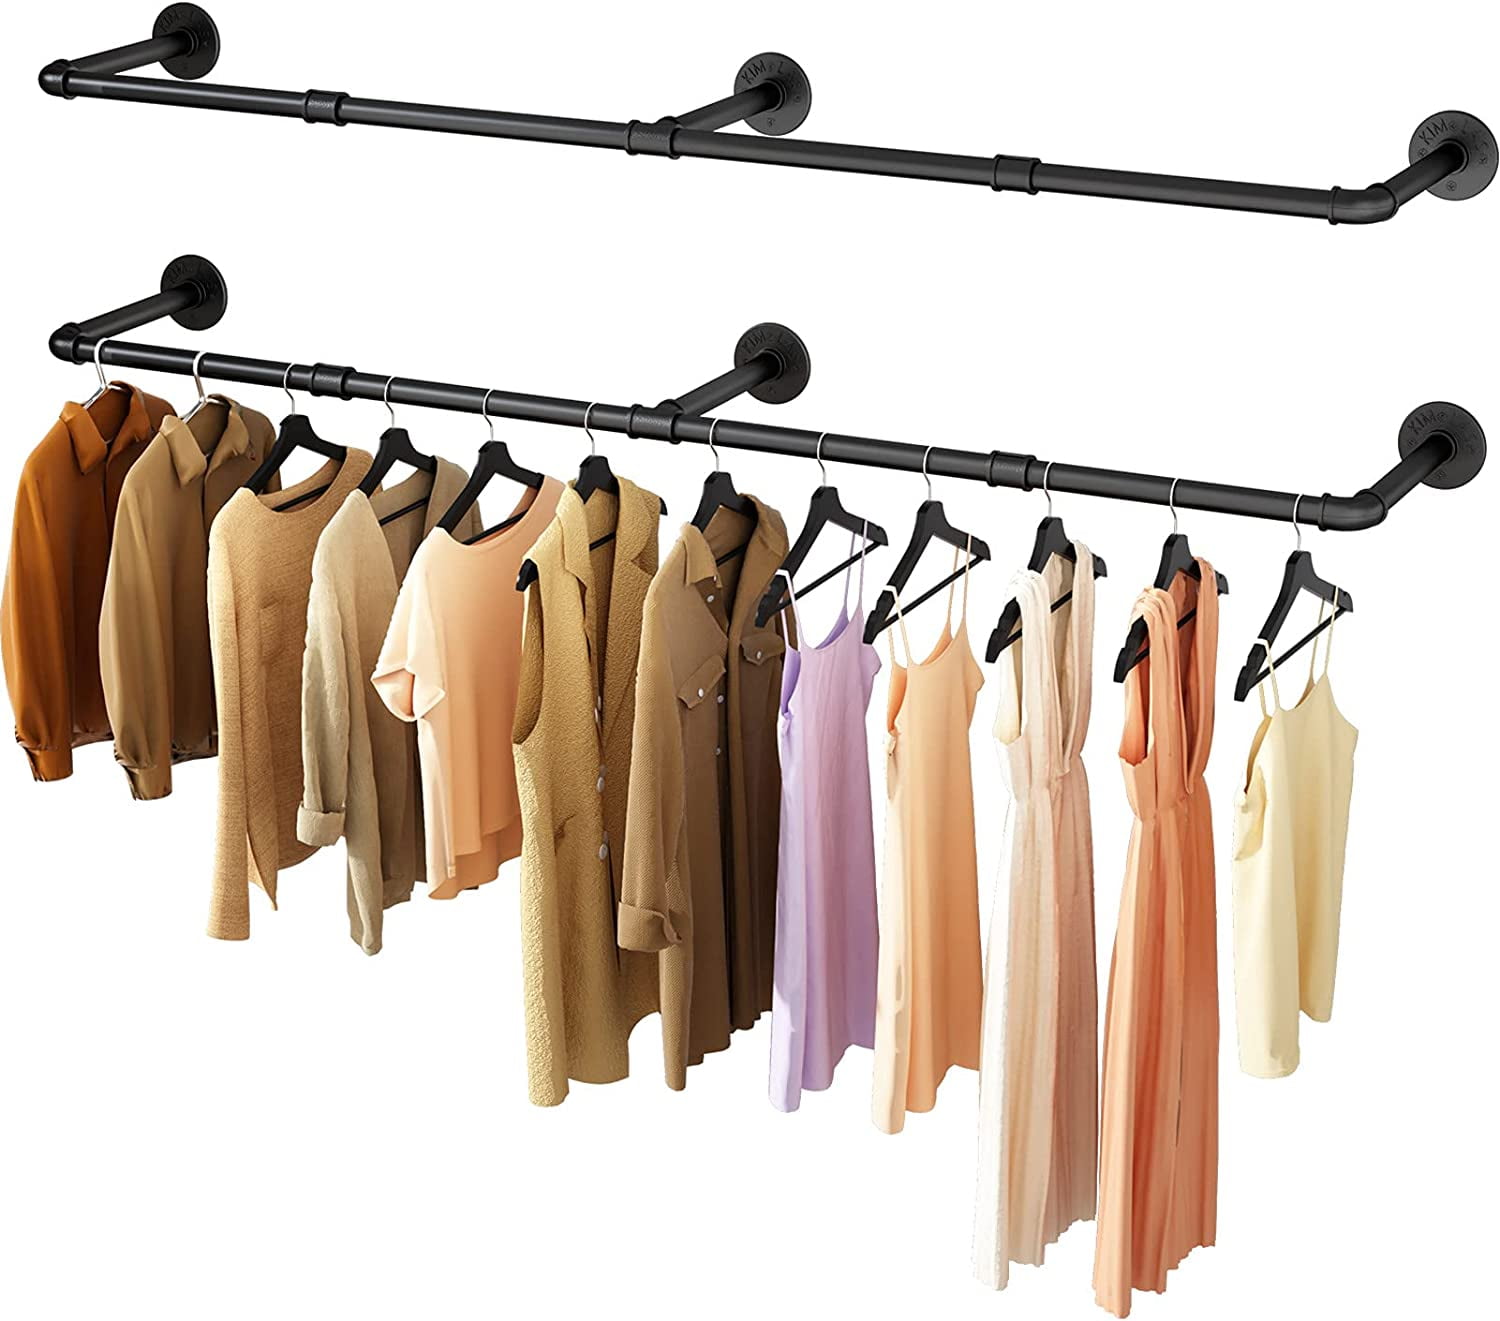 KIOULIK Clothes rack, 72.4in Wall Mounted Industrial Pipe Clothing Rack ...